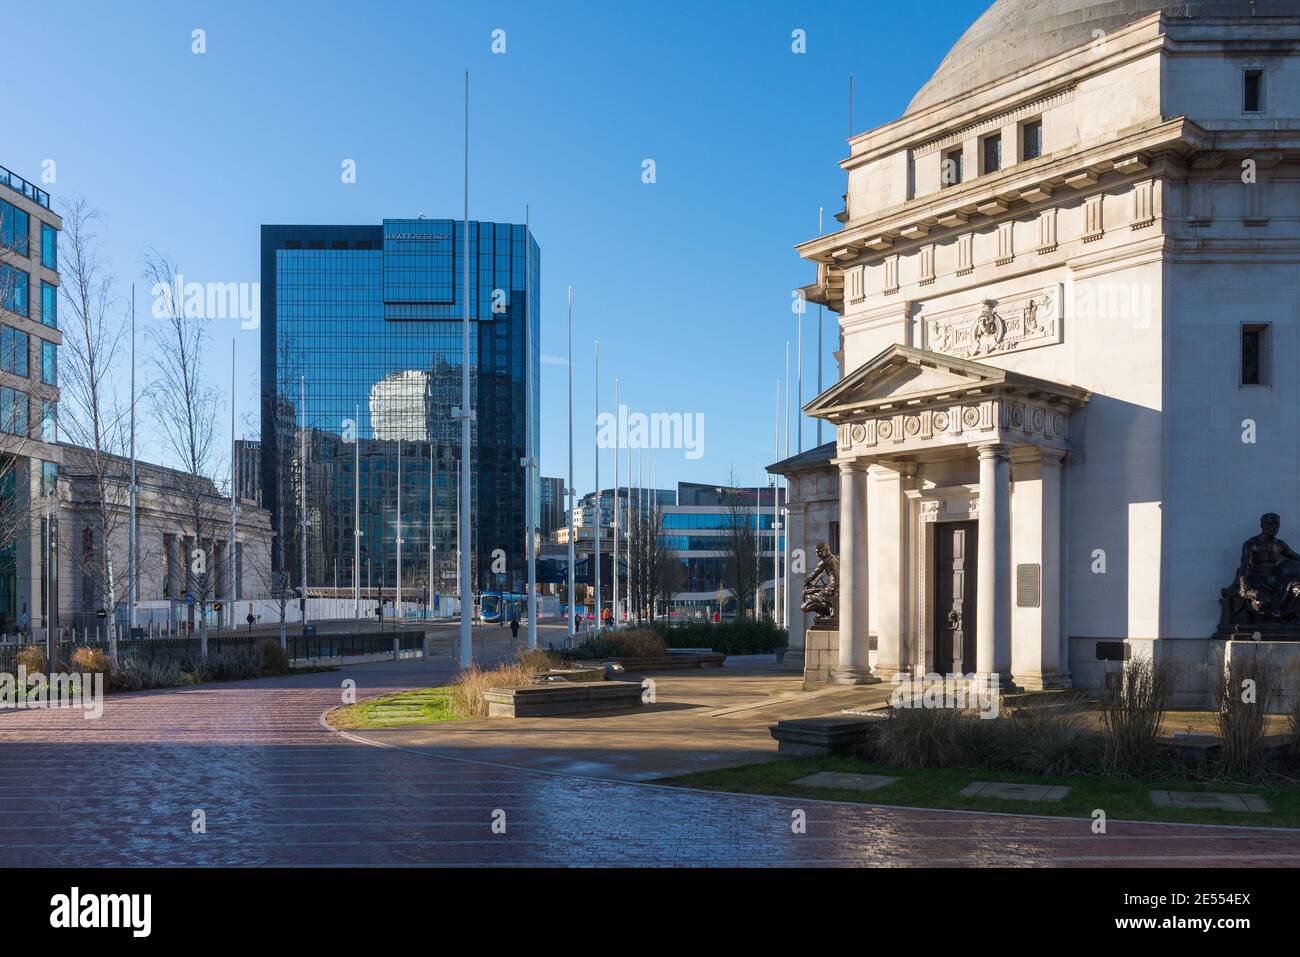 The Hall of Memory in Centenary Square,Birmingham, UKwith the Hyatt hotel and Symphony Hall in the background Stock Photo